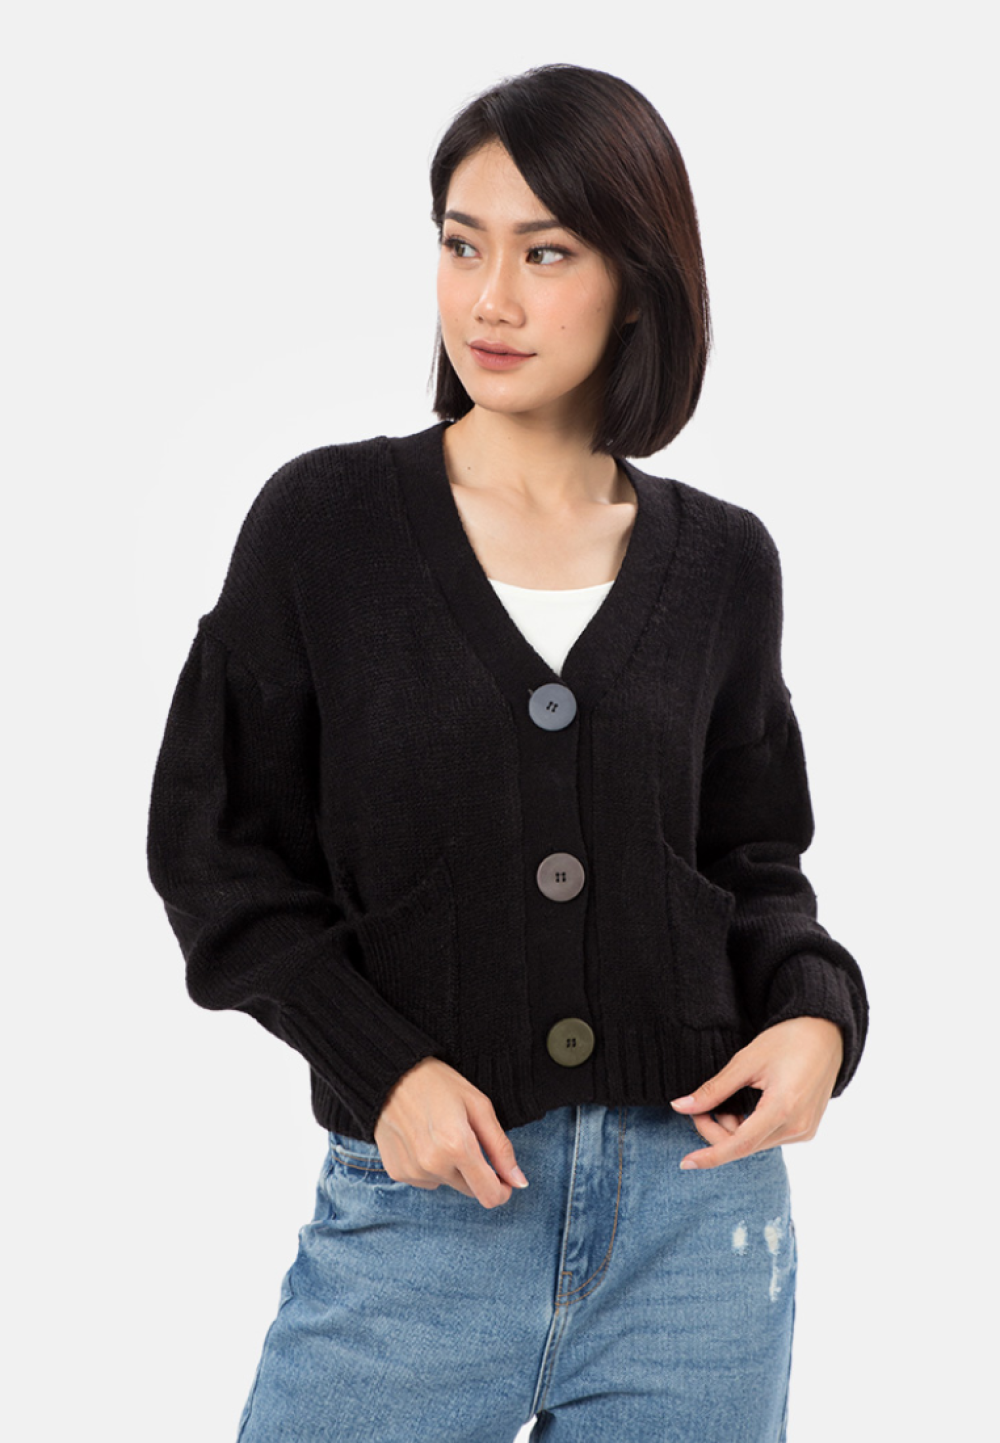 Colourfull Big Button Knit Cardigan in Black